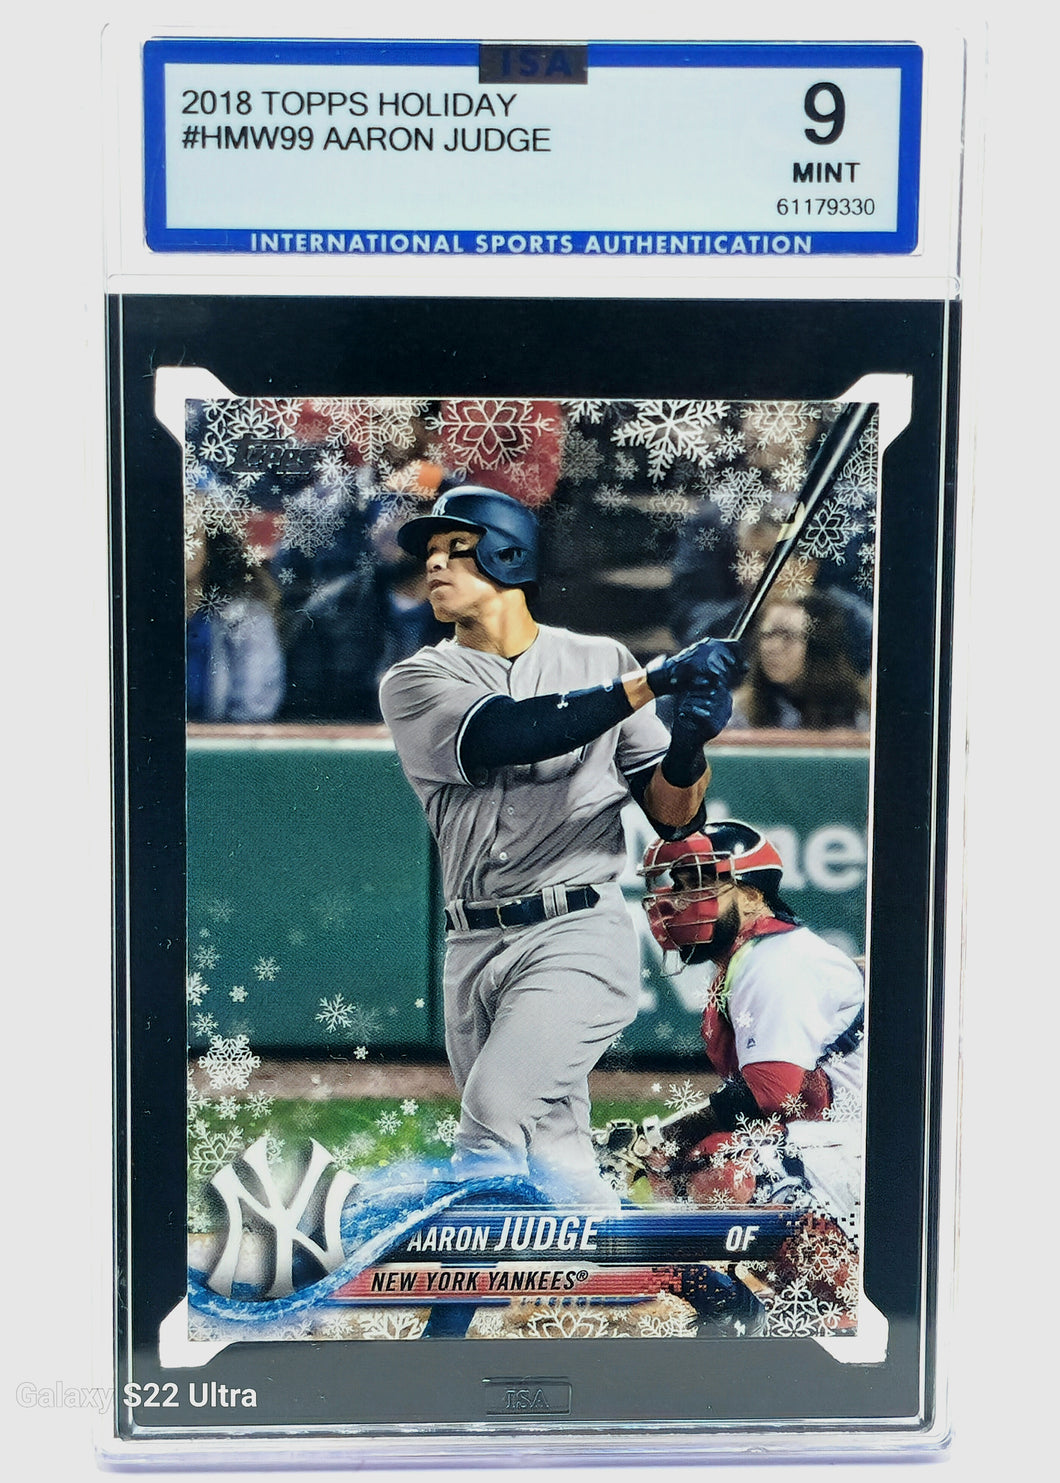 2018 Topps Holiday Aaron Judge #HMW99 ISA 9 MINT NEW YORK YANKEES